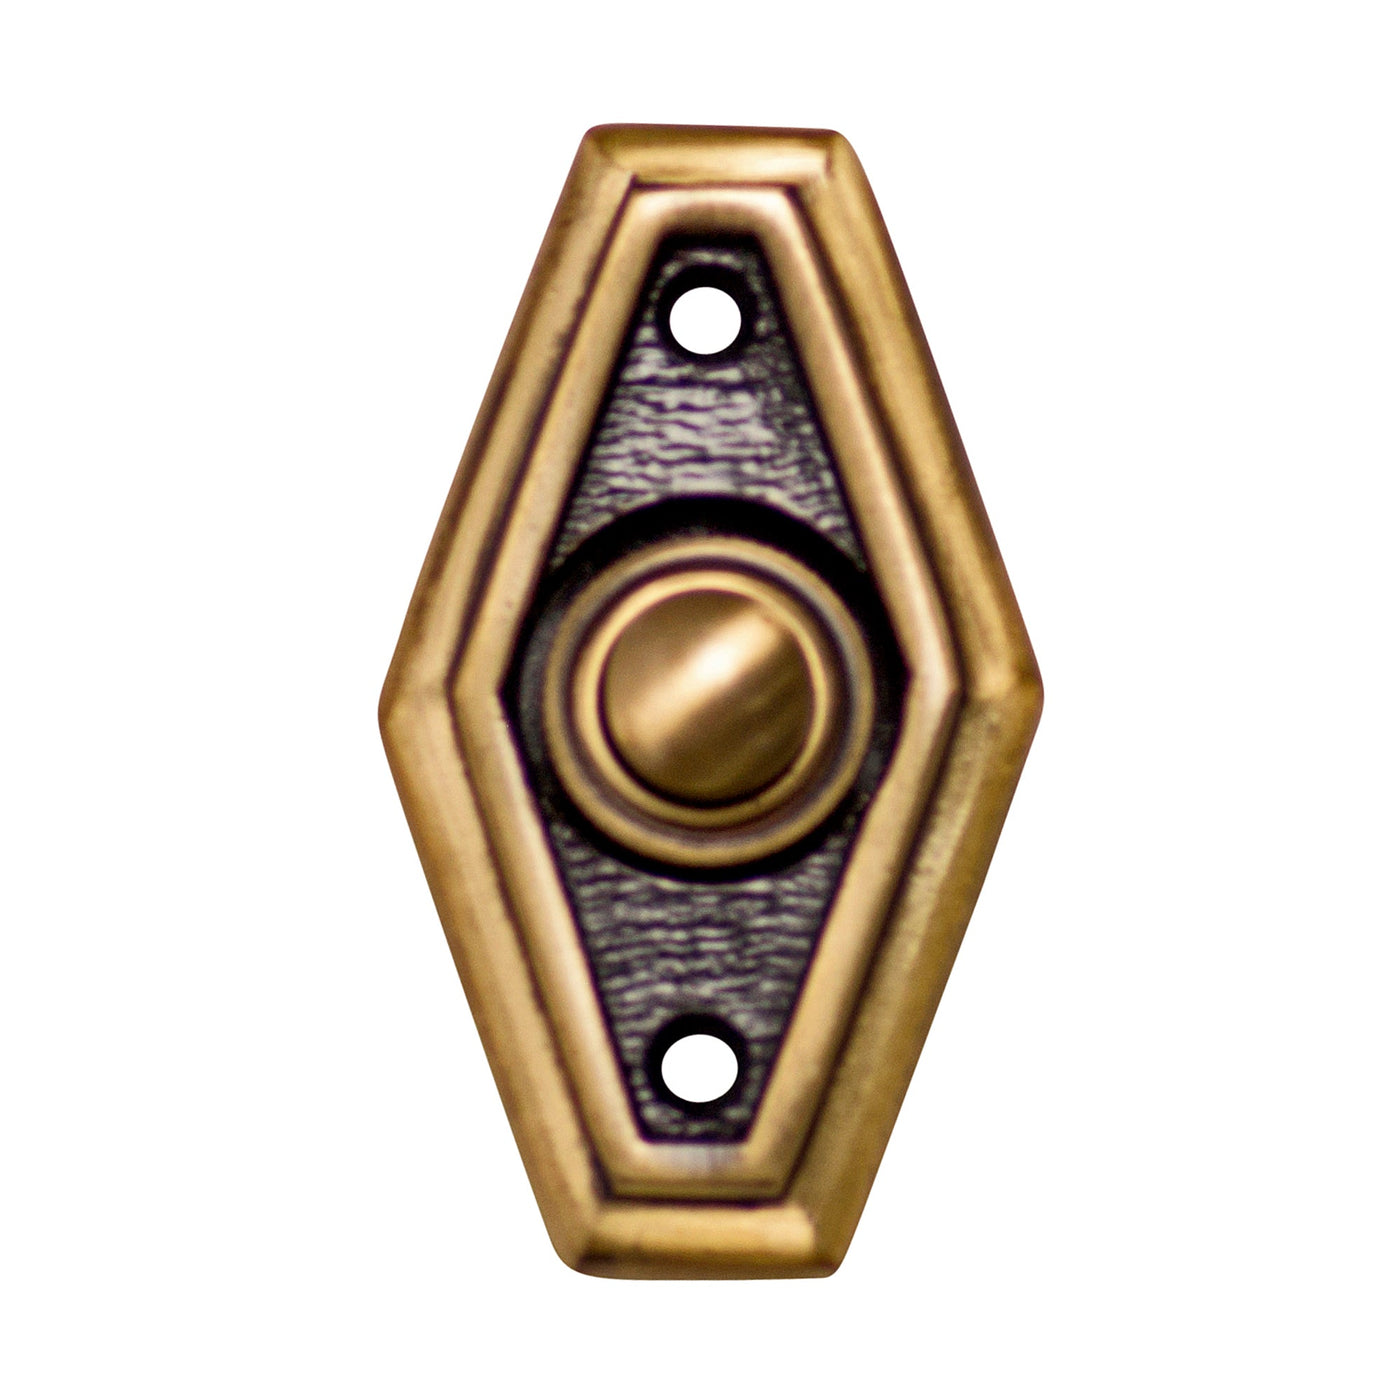 2 1/2 Inch Solid Brass Art Deco Style Doorbell Button (Several Finishes Available)